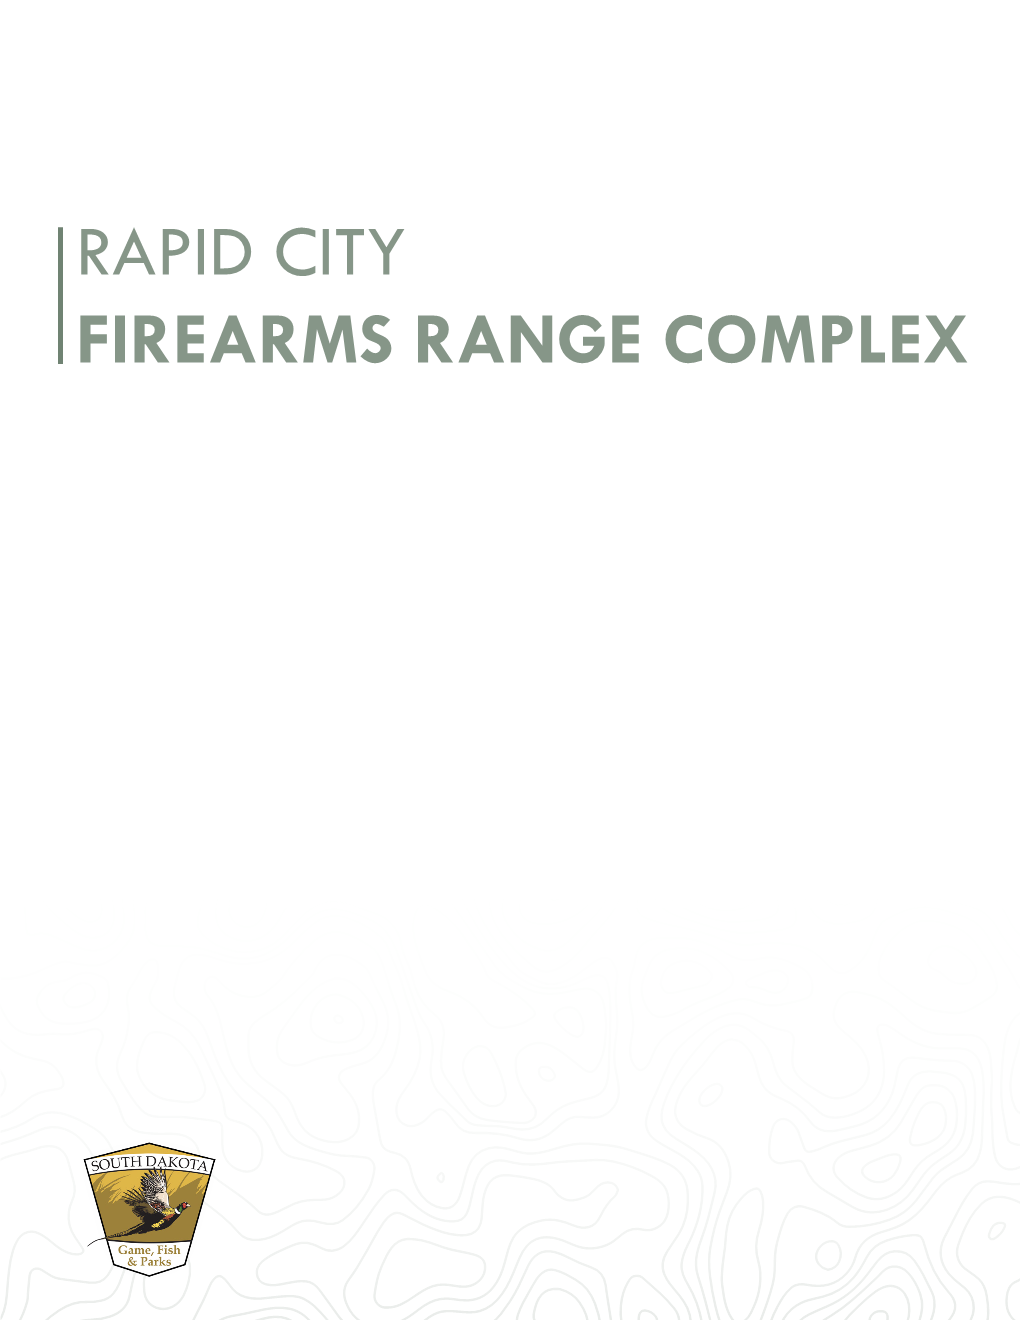 Rapid City Firearms Range Complex Project Summary “Growing up in South Dakota, Shooting Sports Were a Big Part of How I Project Description Was Raised